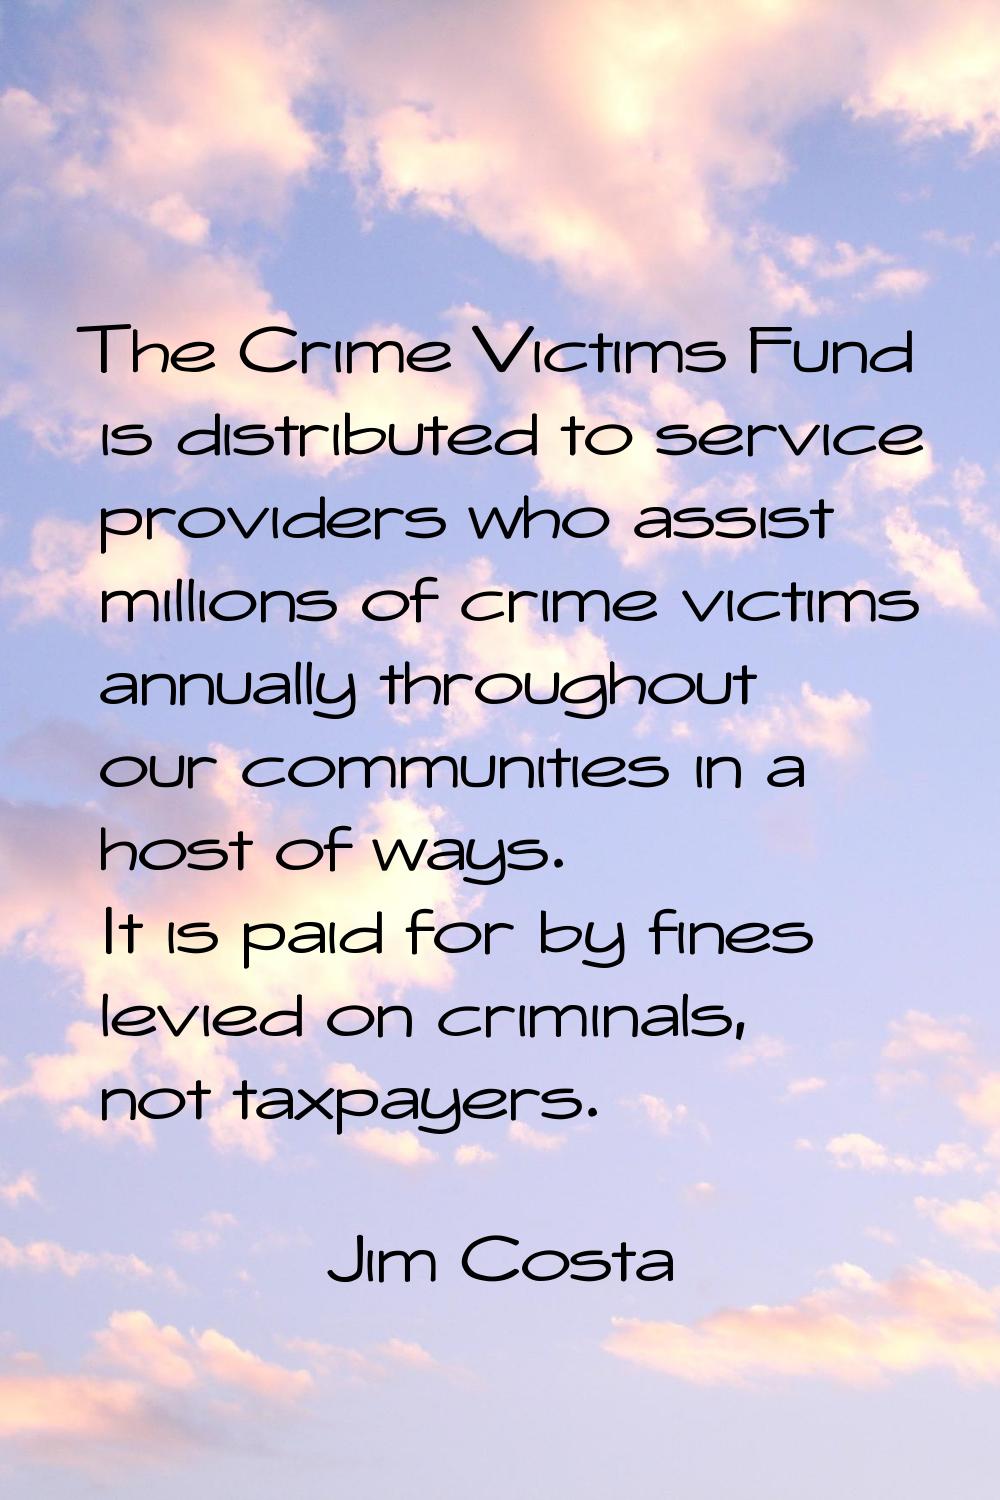 The Crime Victims Fund is distributed to service providers who assist millions of crime victims ann